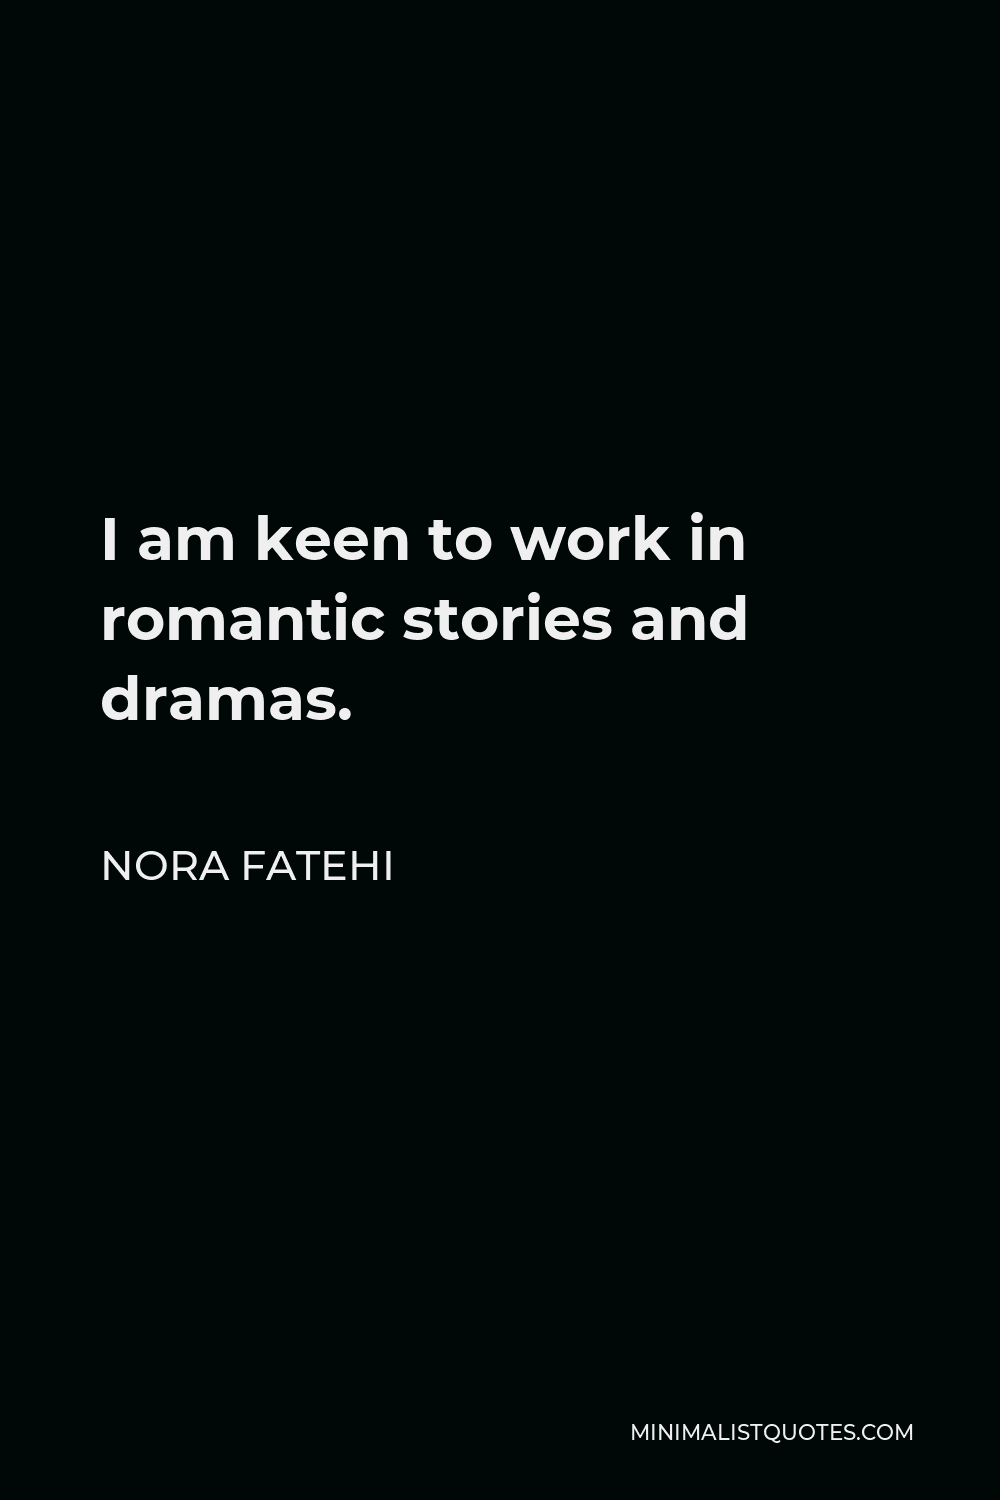 Nora Fatehi Quote - I am keen to work in romantic stories and dramas.